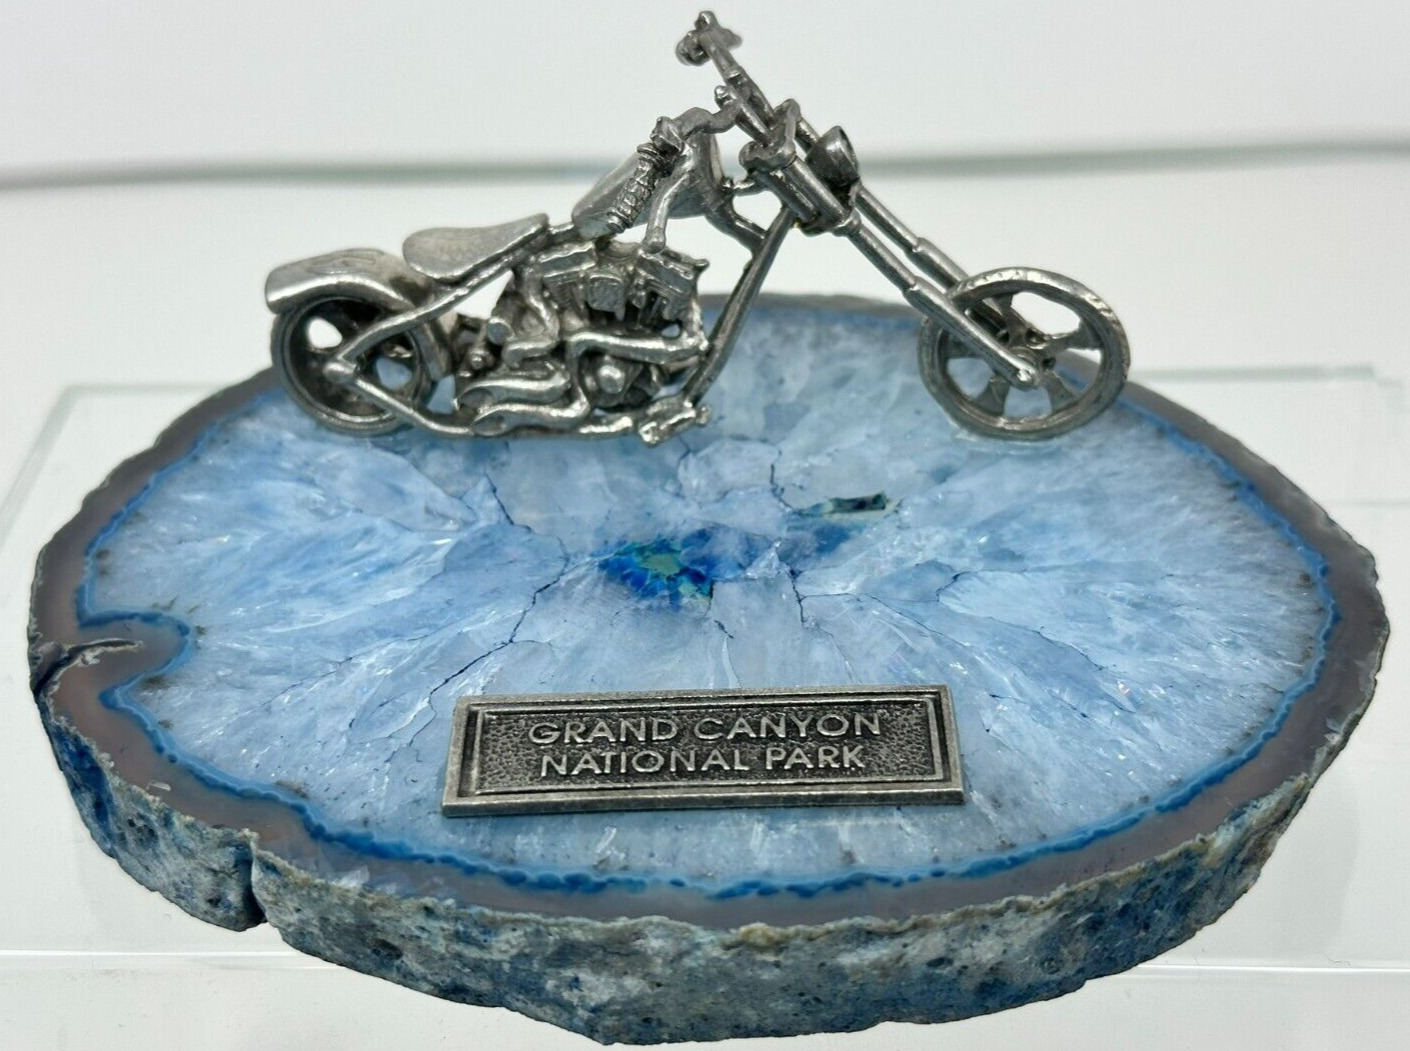 Harley Davidon Pewter Motorcycle on Agate Geode Slice from the Grand Canyon, AZ